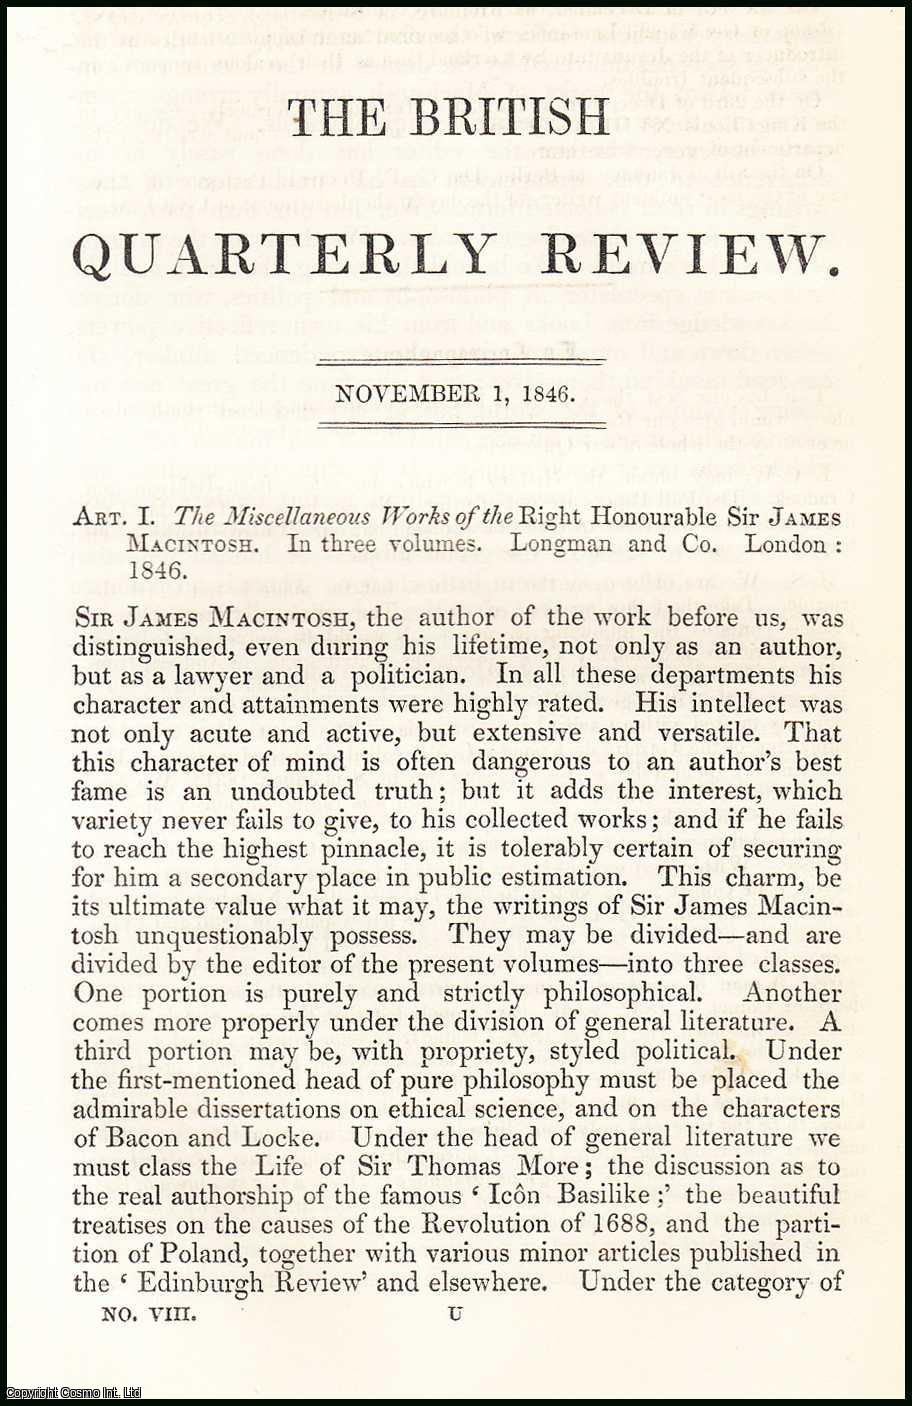 Author Unknown - The Miscellaneous Works of the Honourable Sir James Macintosh. A rare original article from the British Quarterly Review, 1846.